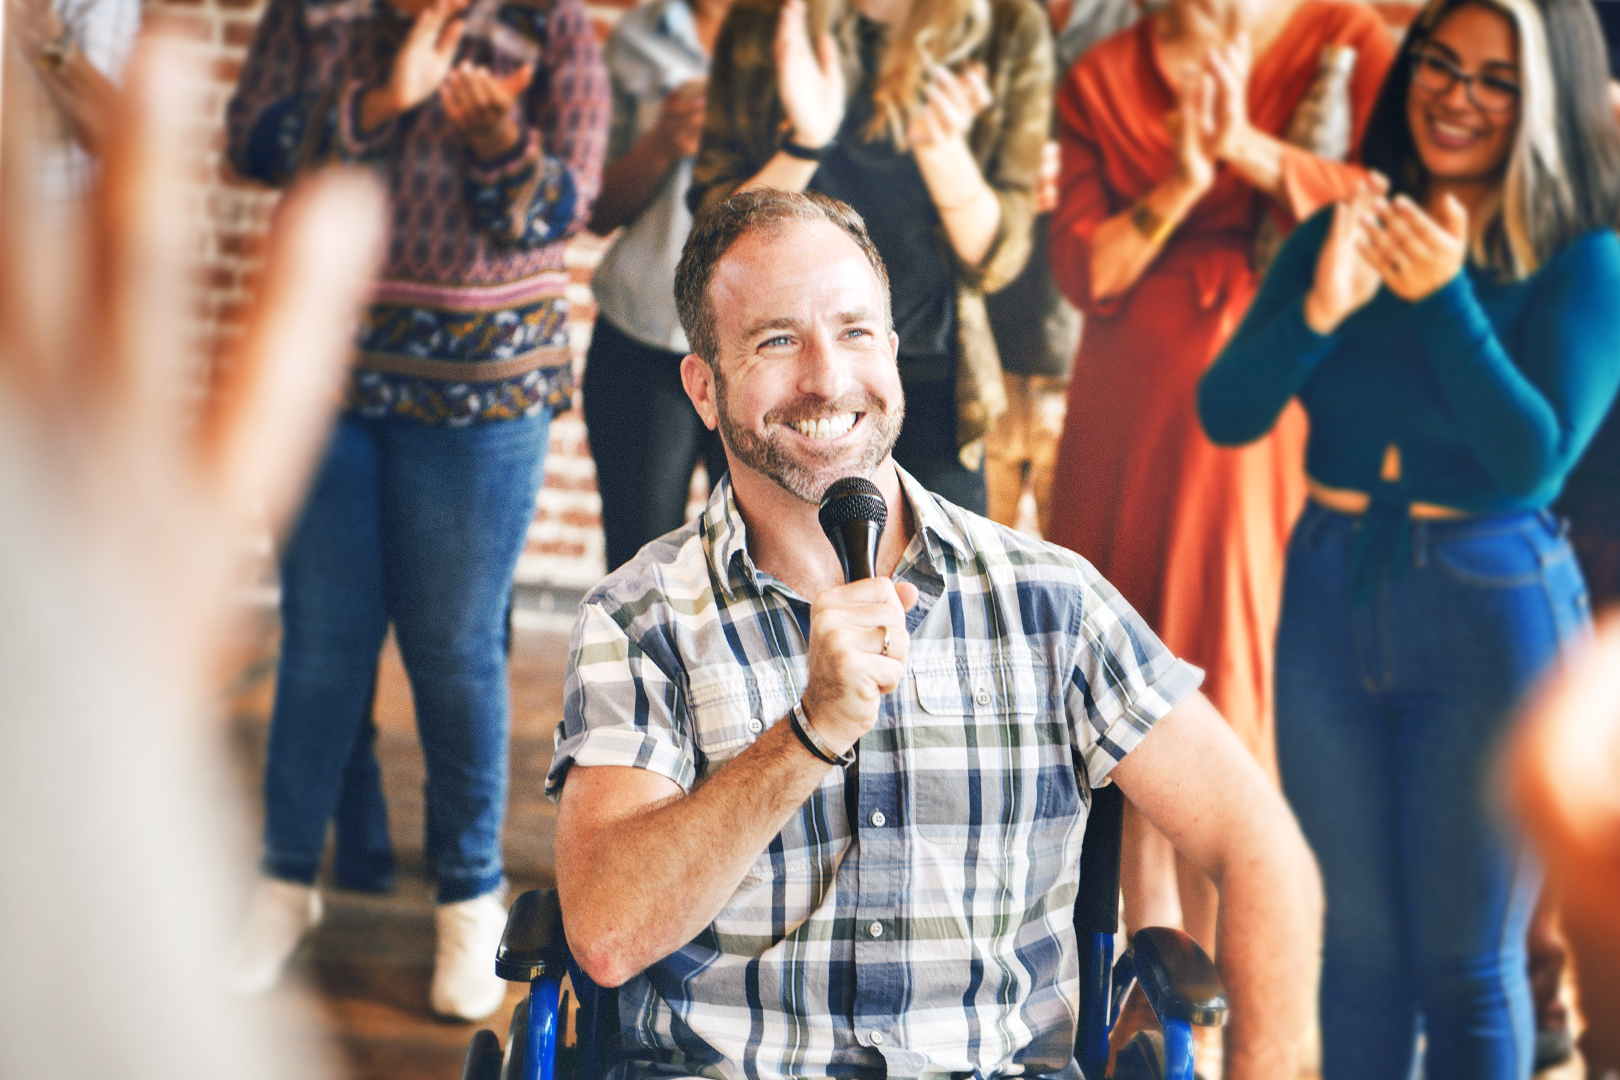 smiling keynote speaker in a wheelchair holding a microphone while getting cheered on by his peers